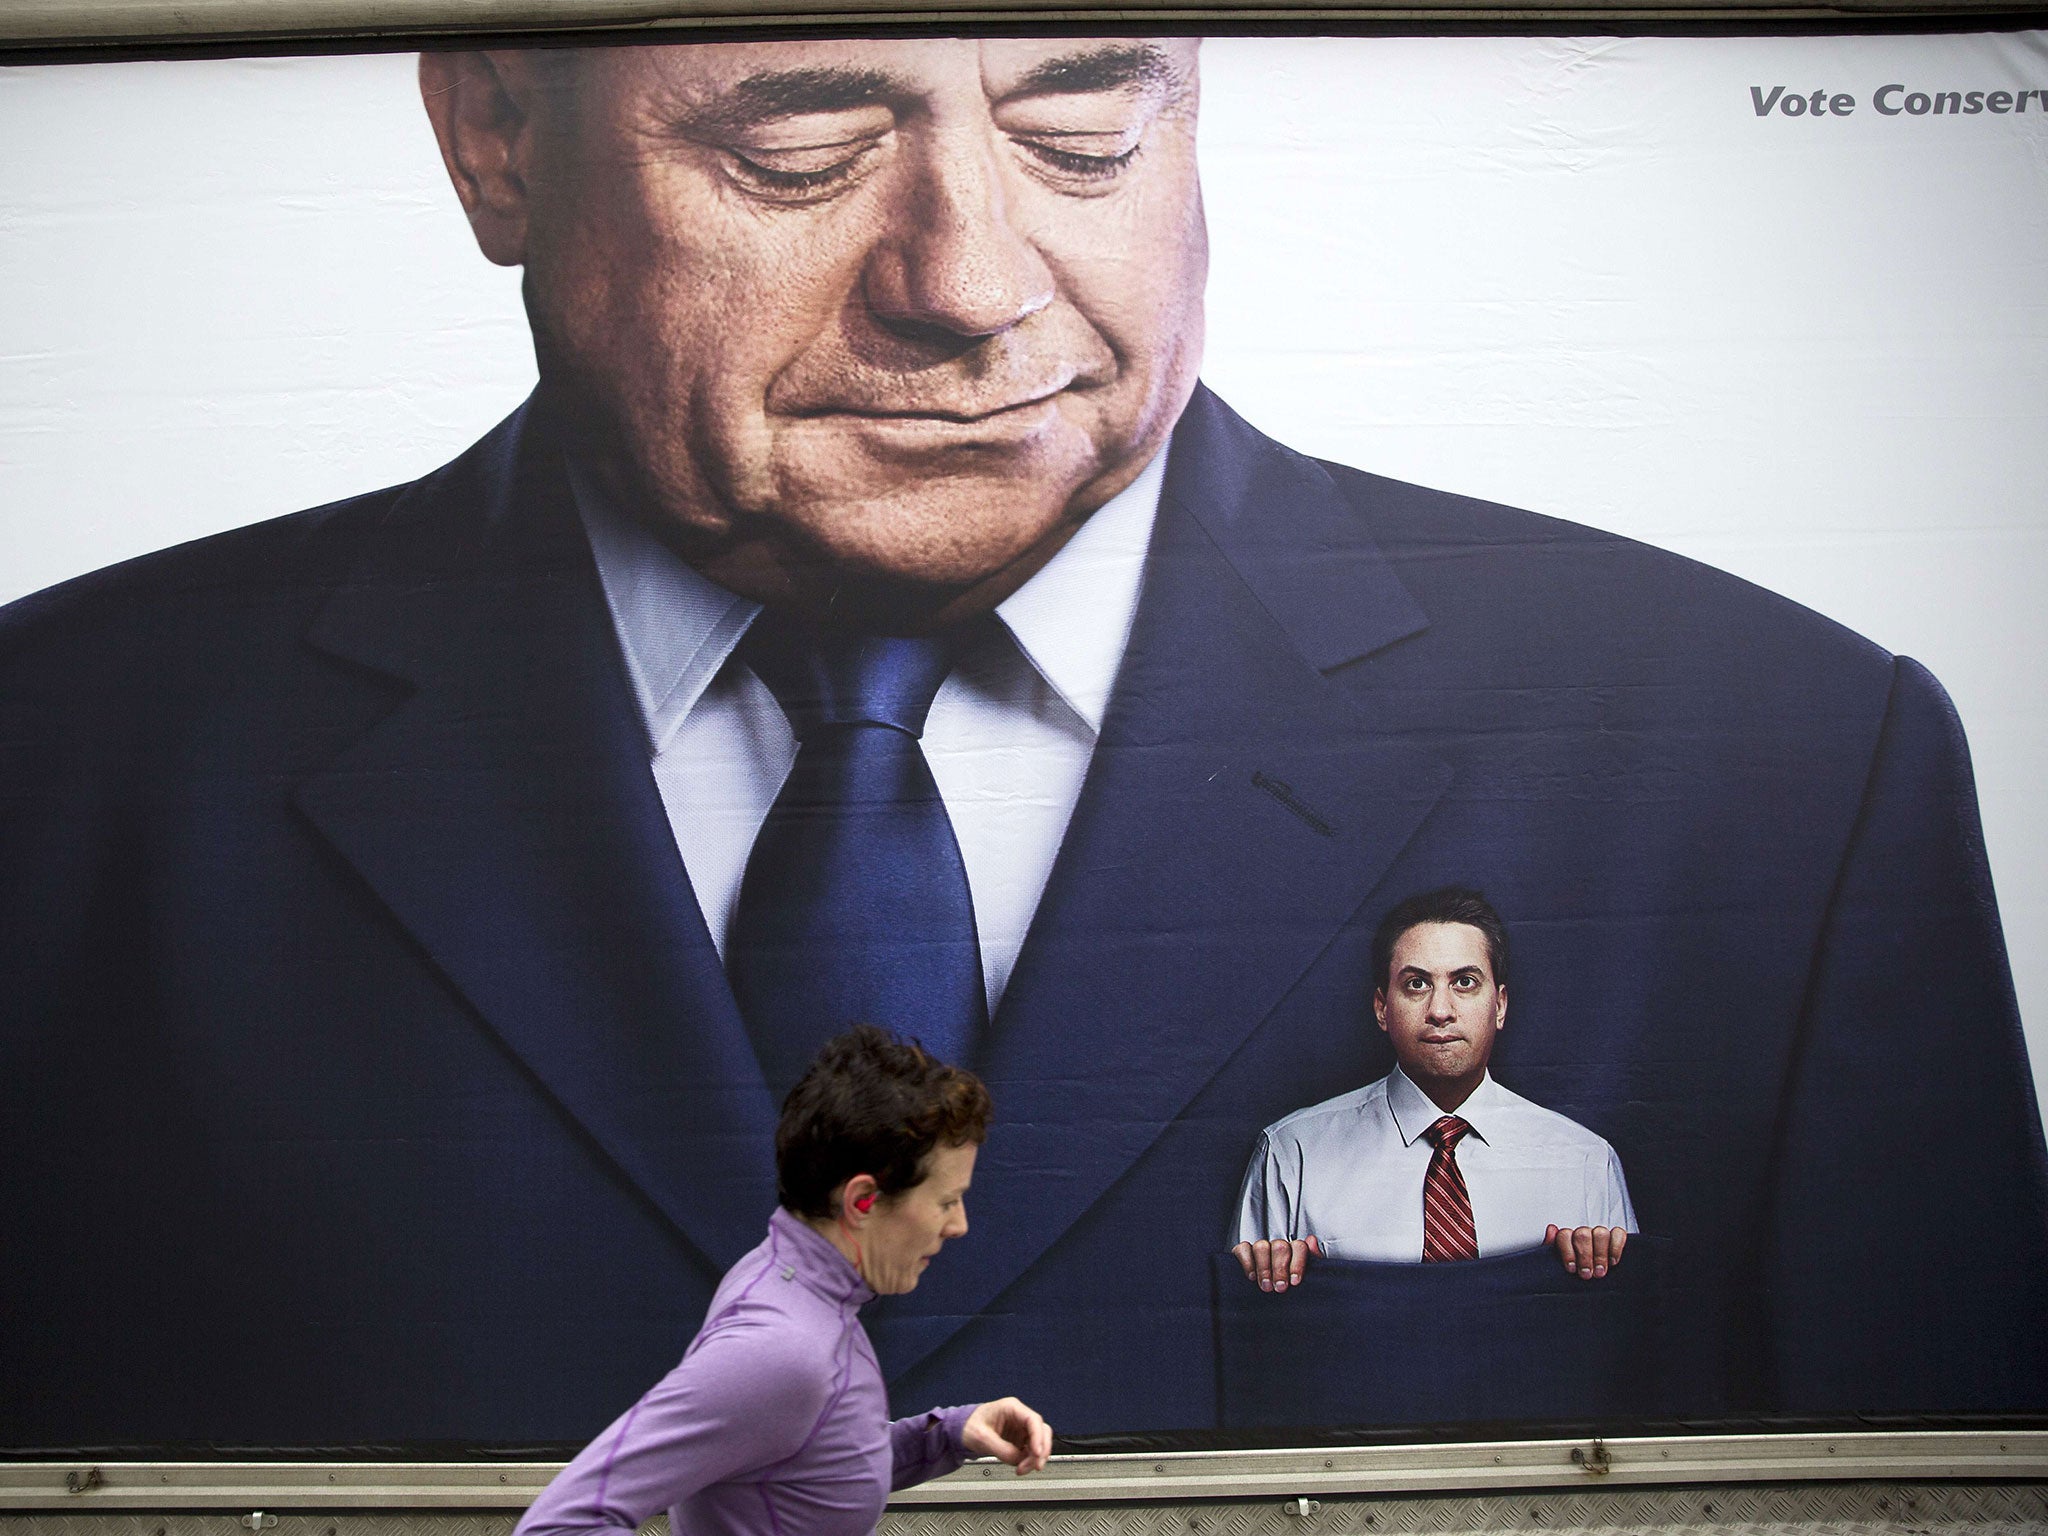 Ed Miliband in Alex Salmond's pocket – a 2015 Tory campaign poster claiming Labour would be forced into a ‘coalition of chaos’